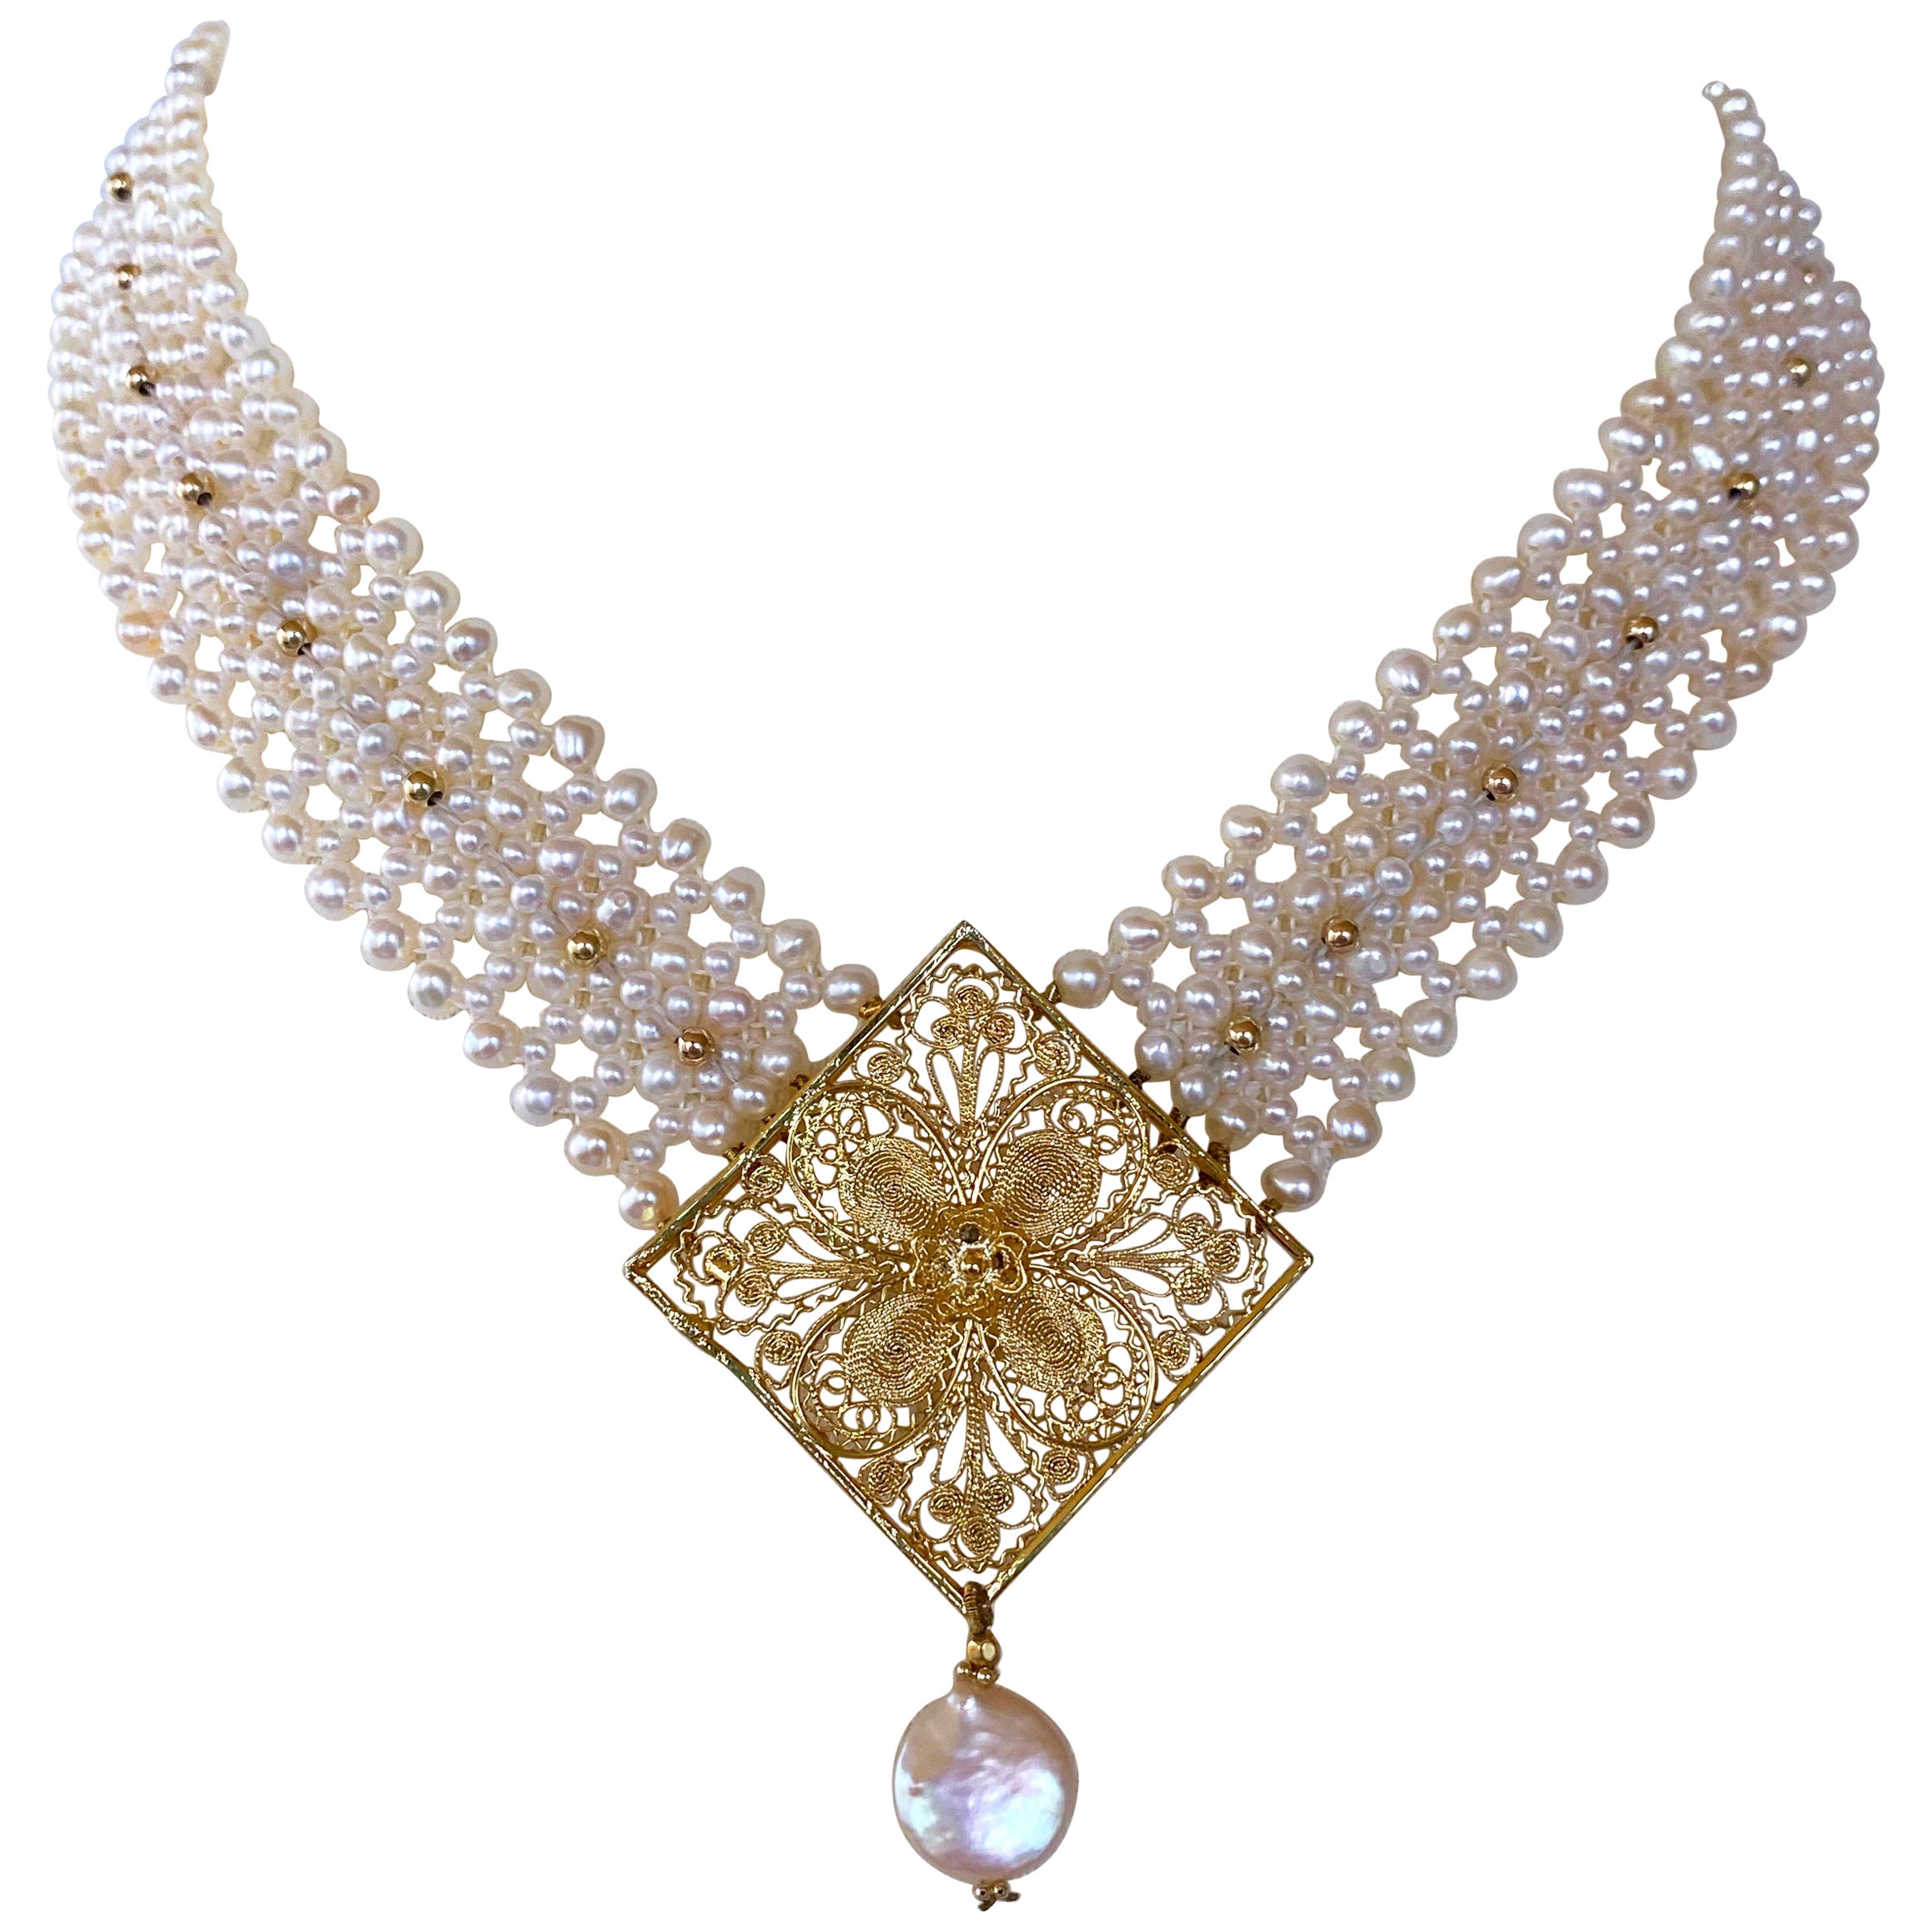 Marina J. Pearl Woven Necklace with Gold Plated Centerpiece & Gold Findings